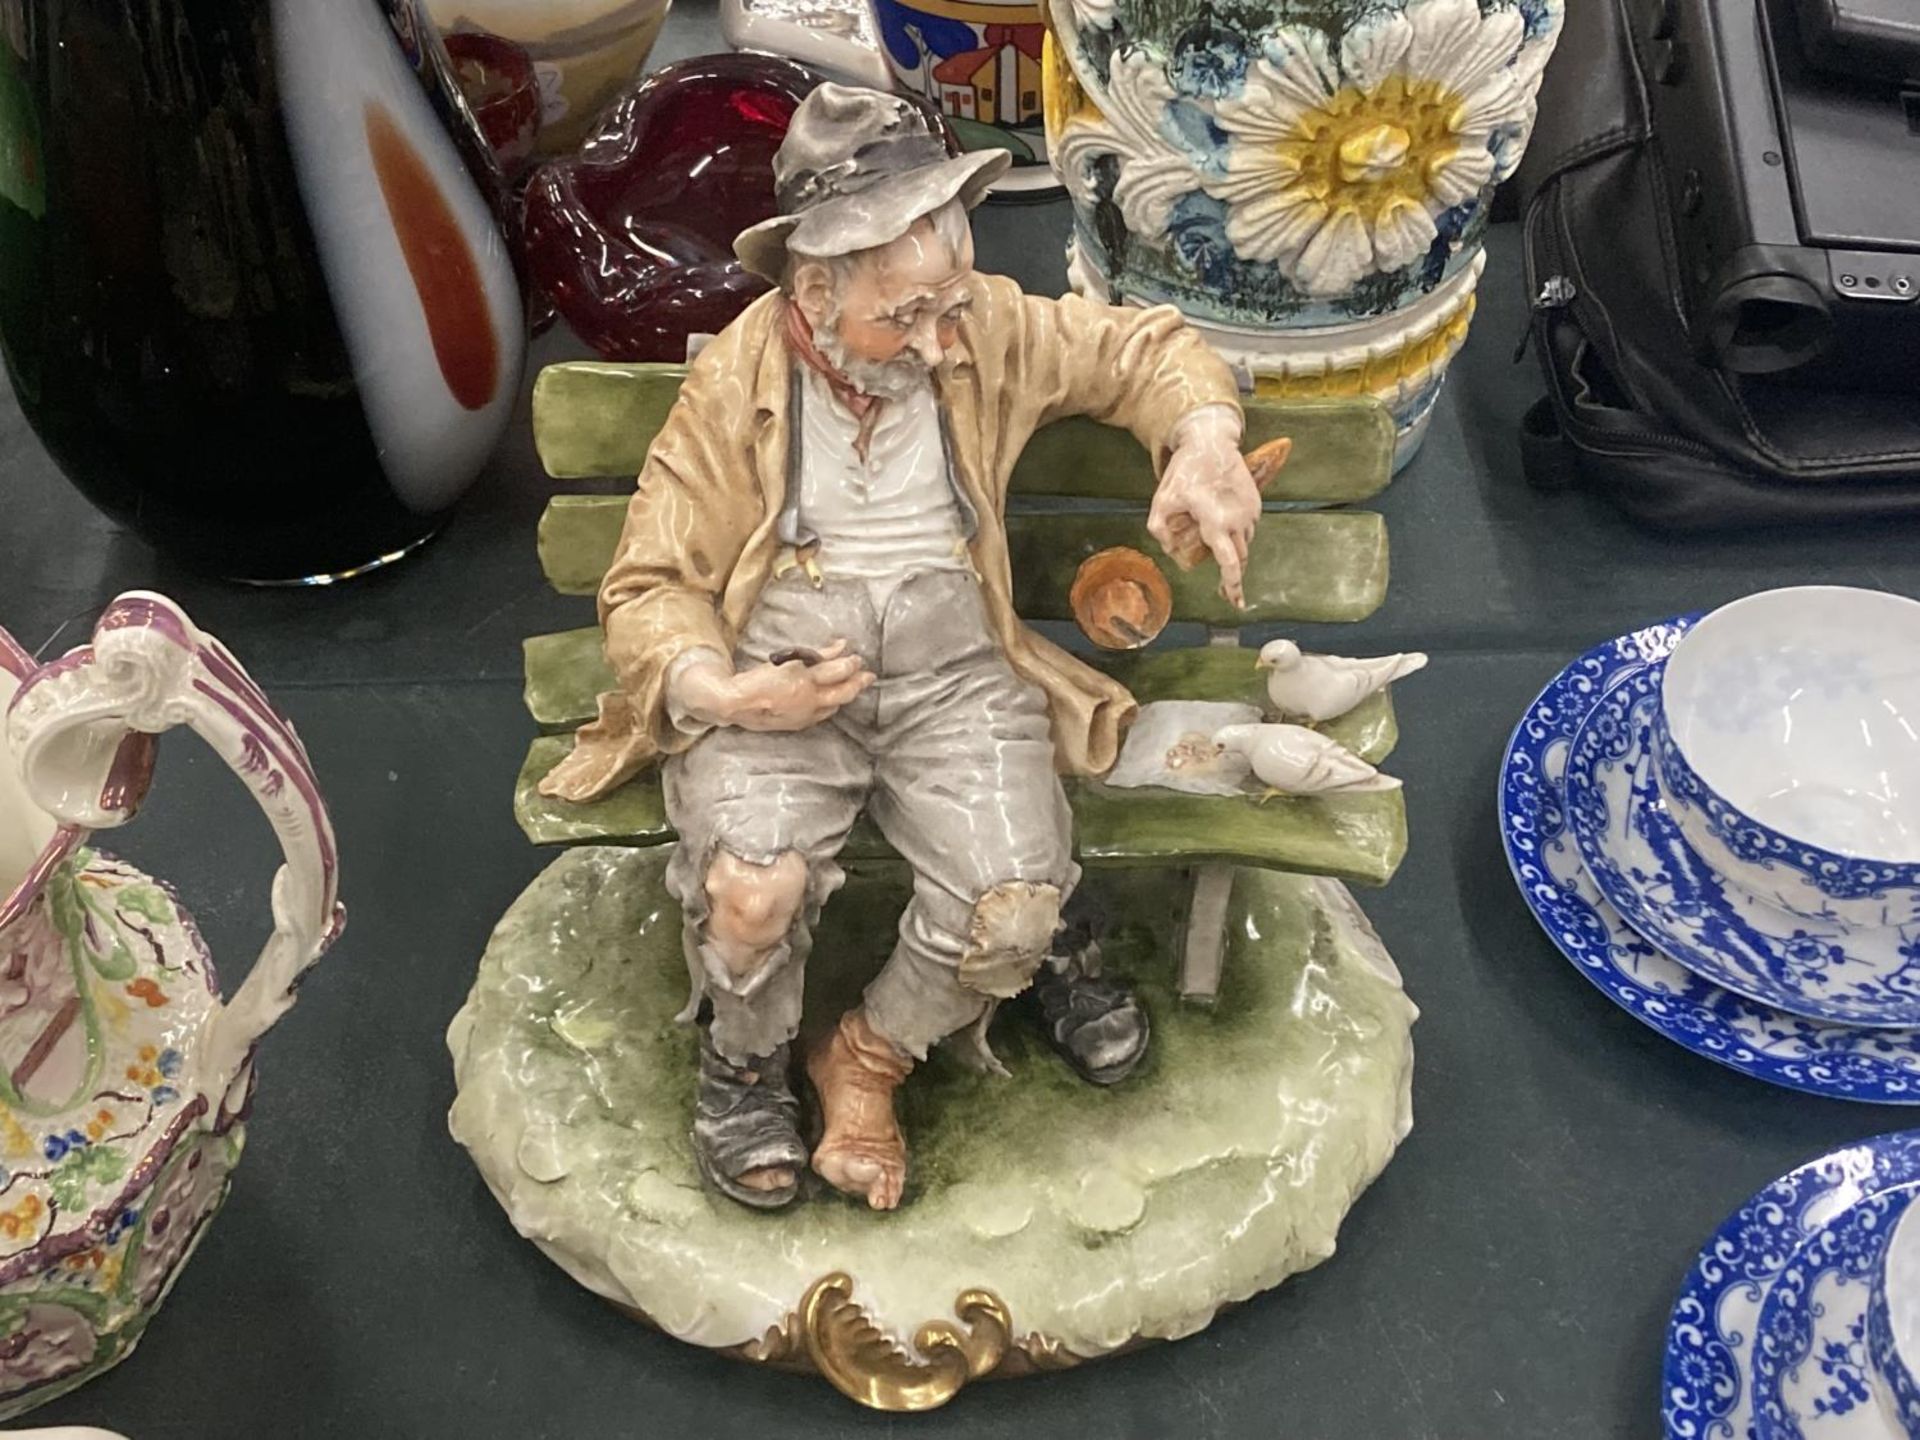 TWO ITALIAN CAPODIMONTE STYLE FIGURES TO INCLUDE AN OLD MAN ON A BENCH FEEDING BIRDS AND A BOY - Image 2 of 6